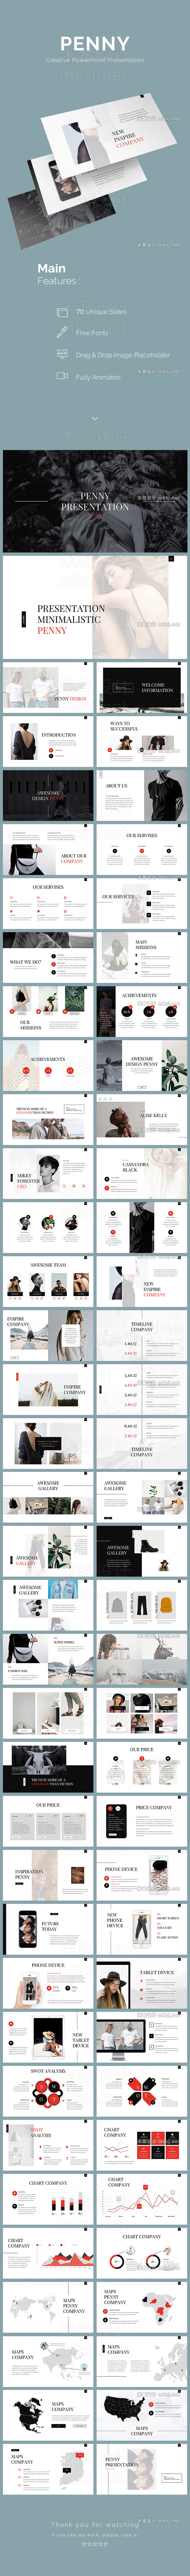 PPT模板 penny powerpoint template